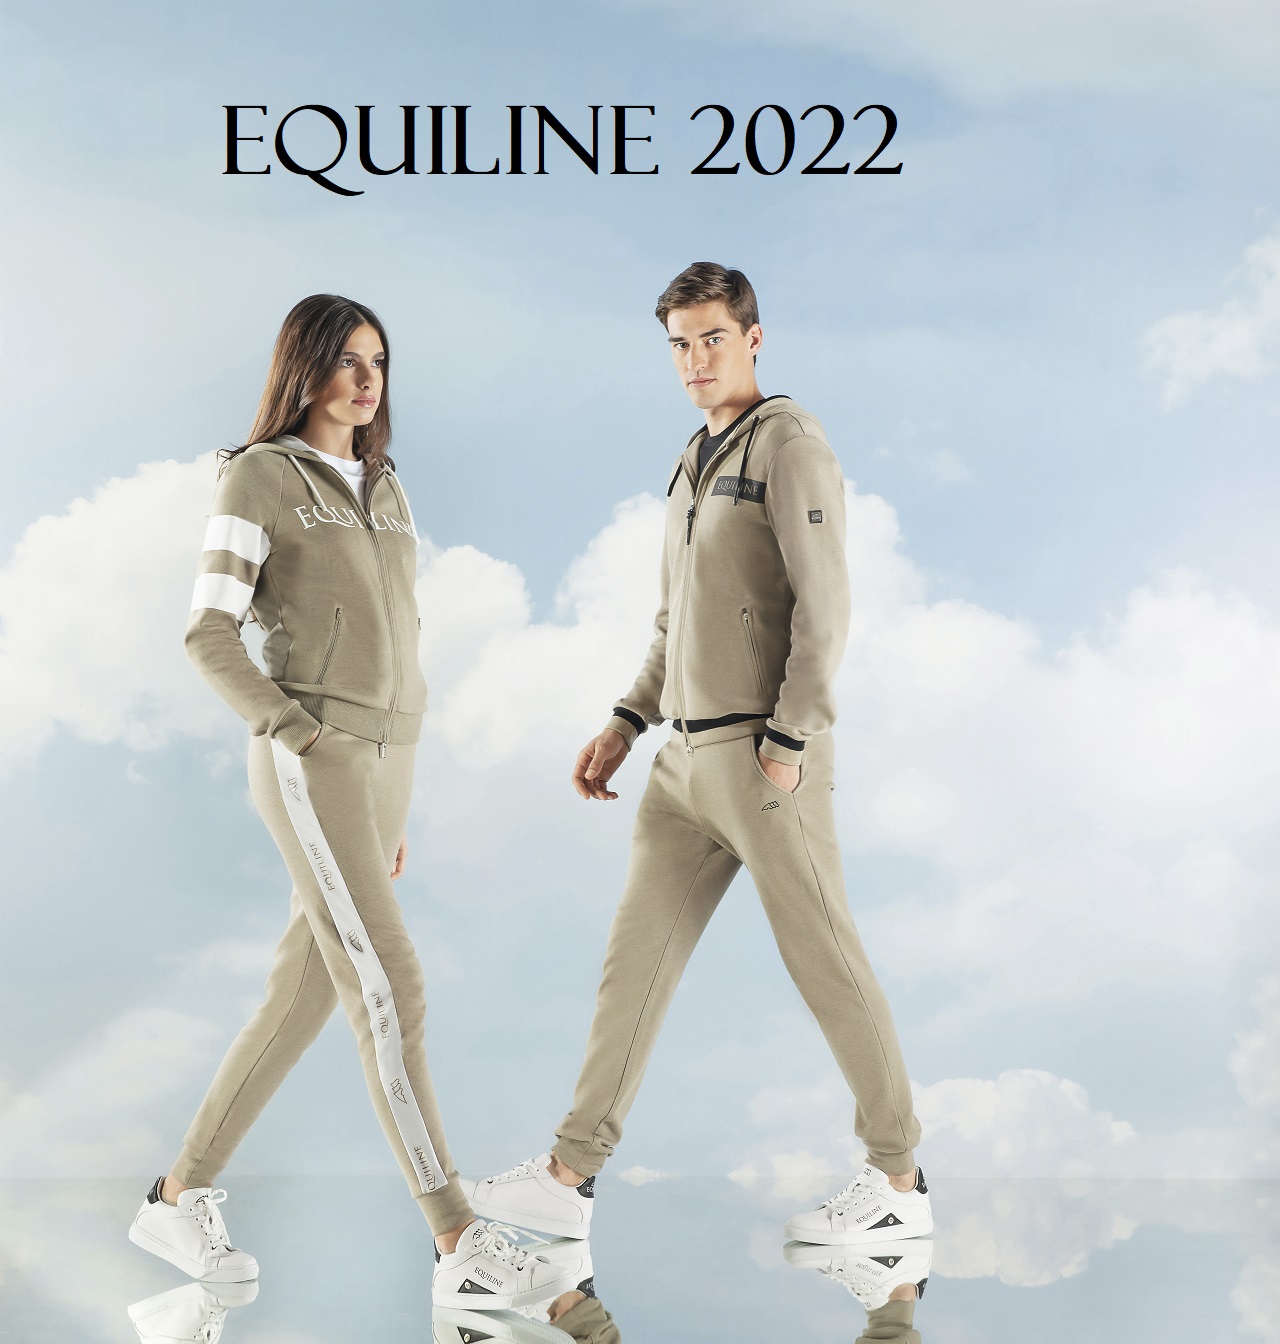 Equiline2022